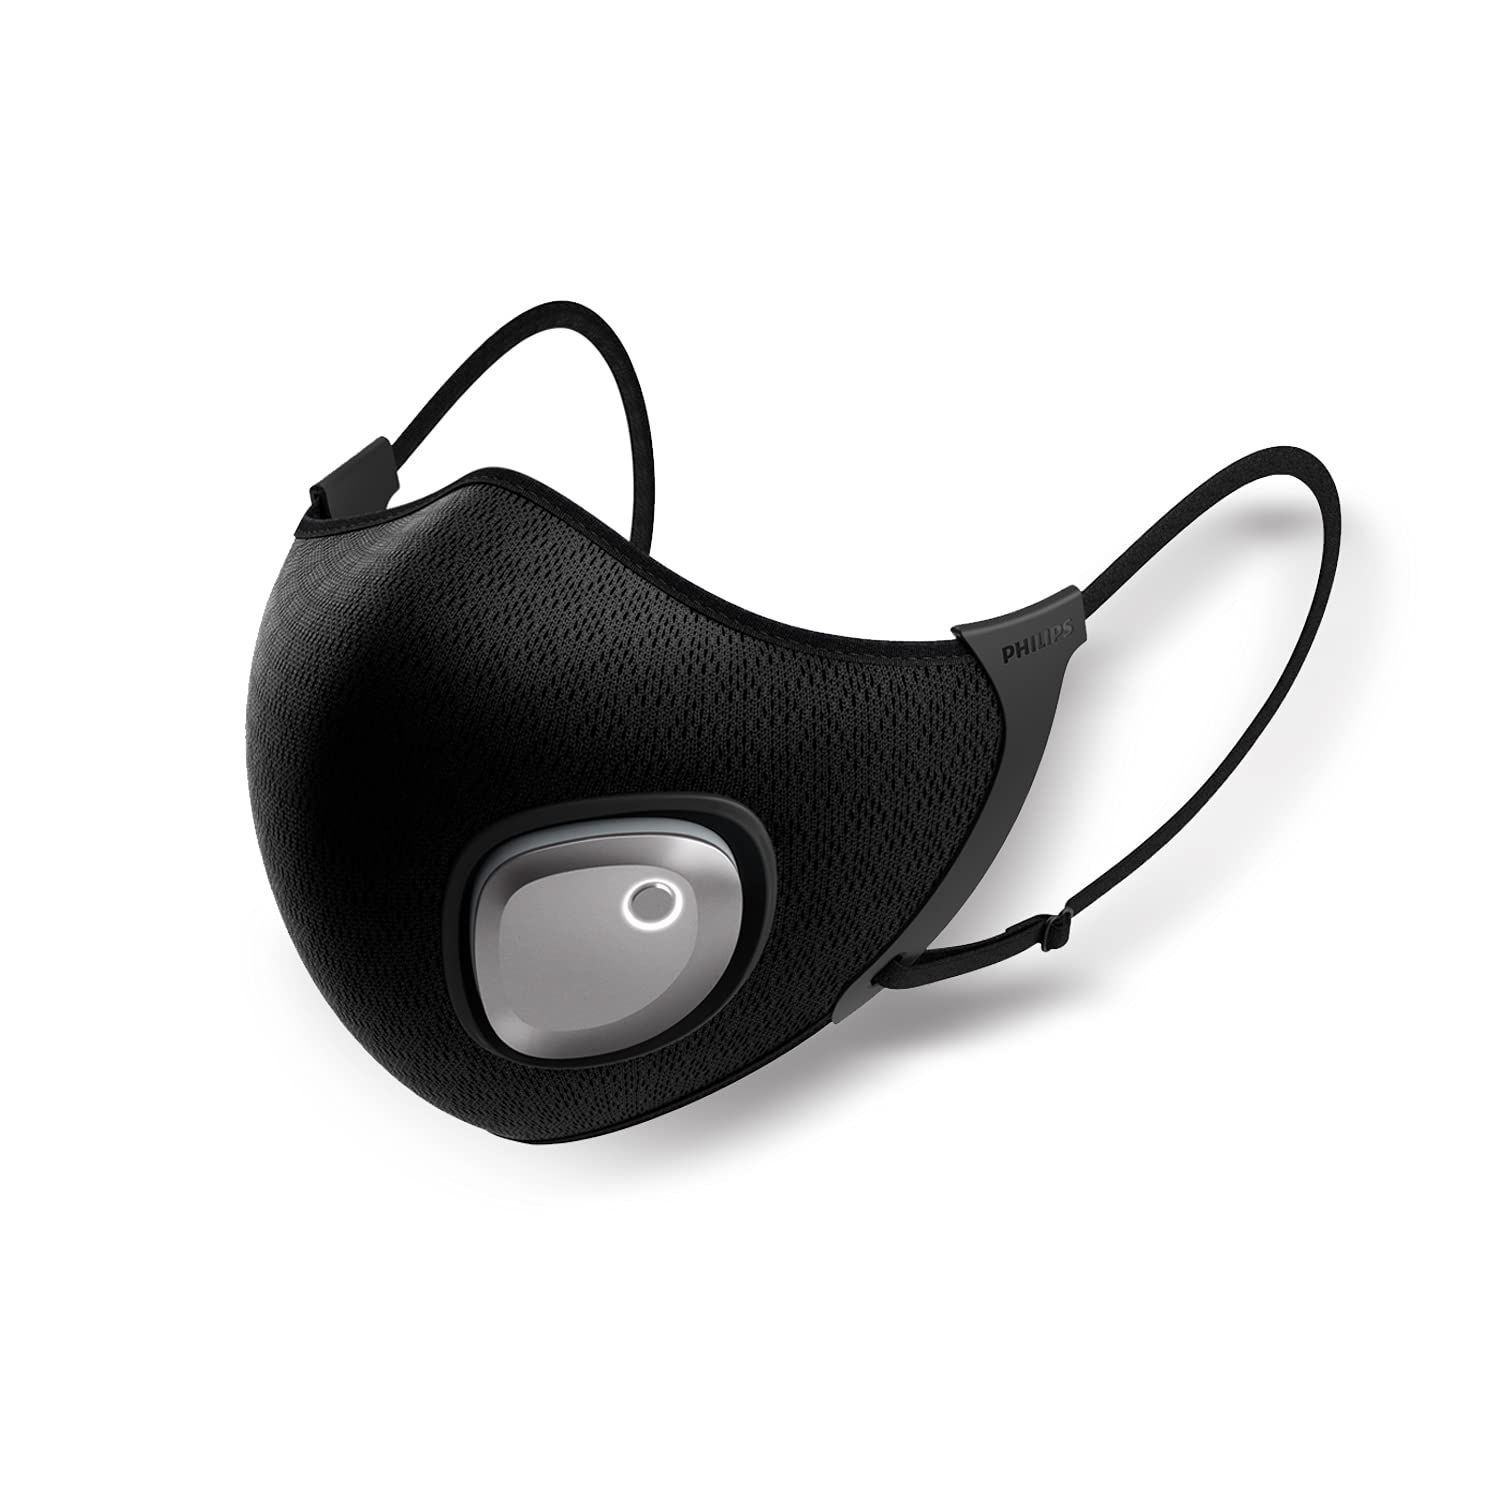 Philips Fresh Air Anti-pollution Mask, Superior Breathing Comfort, 4 Stage Filtration - Black